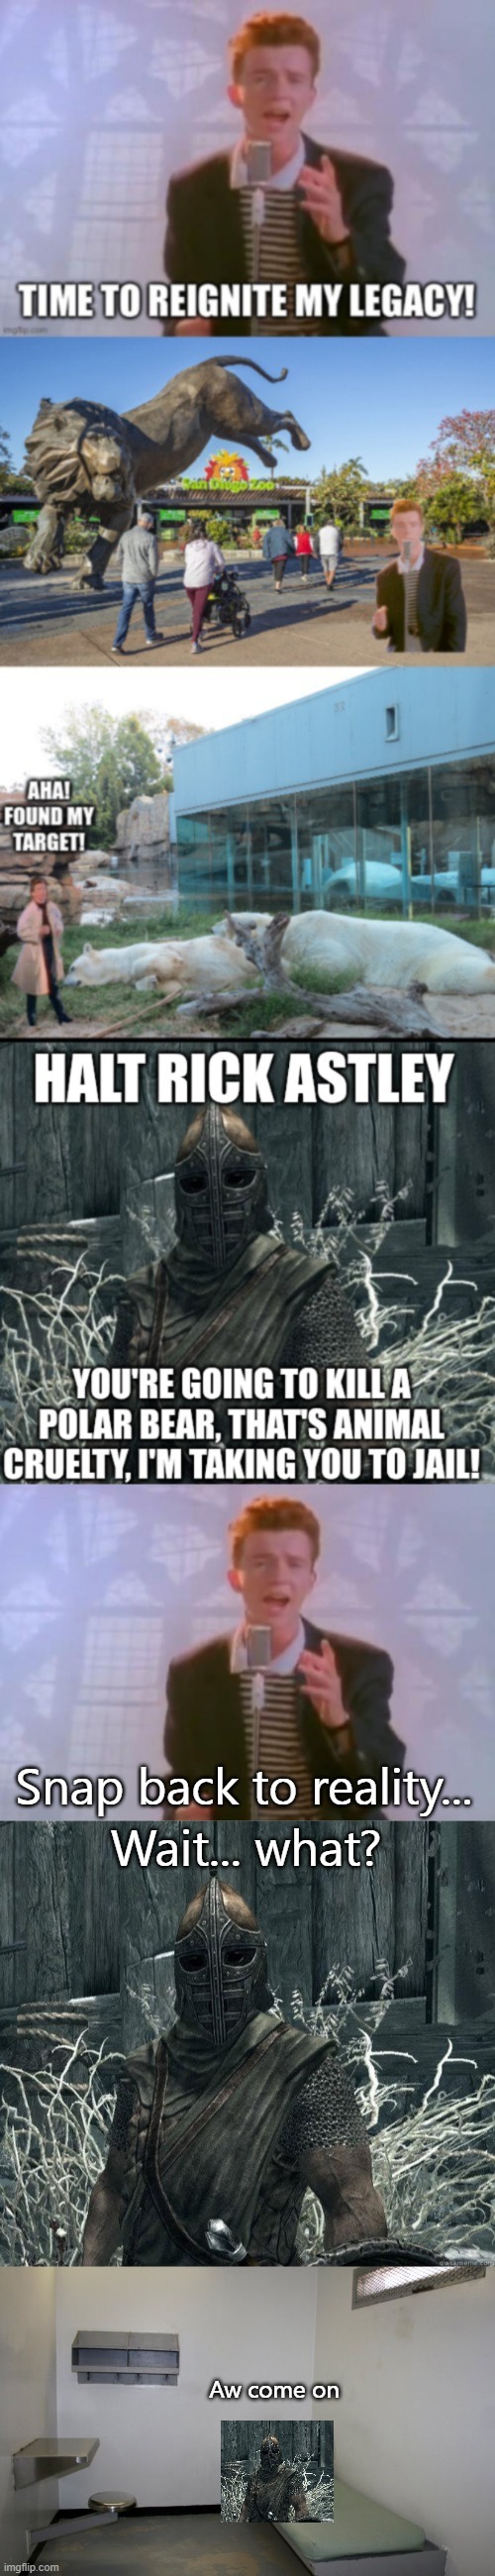 When Rick says "Snap back to reality" he is not bound my Eminem's commandments | Snap back to reality... Wait... what? Aw come on | image tagged in rick astley,skyrimguard,prison cell inside | made w/ Imgflip meme maker